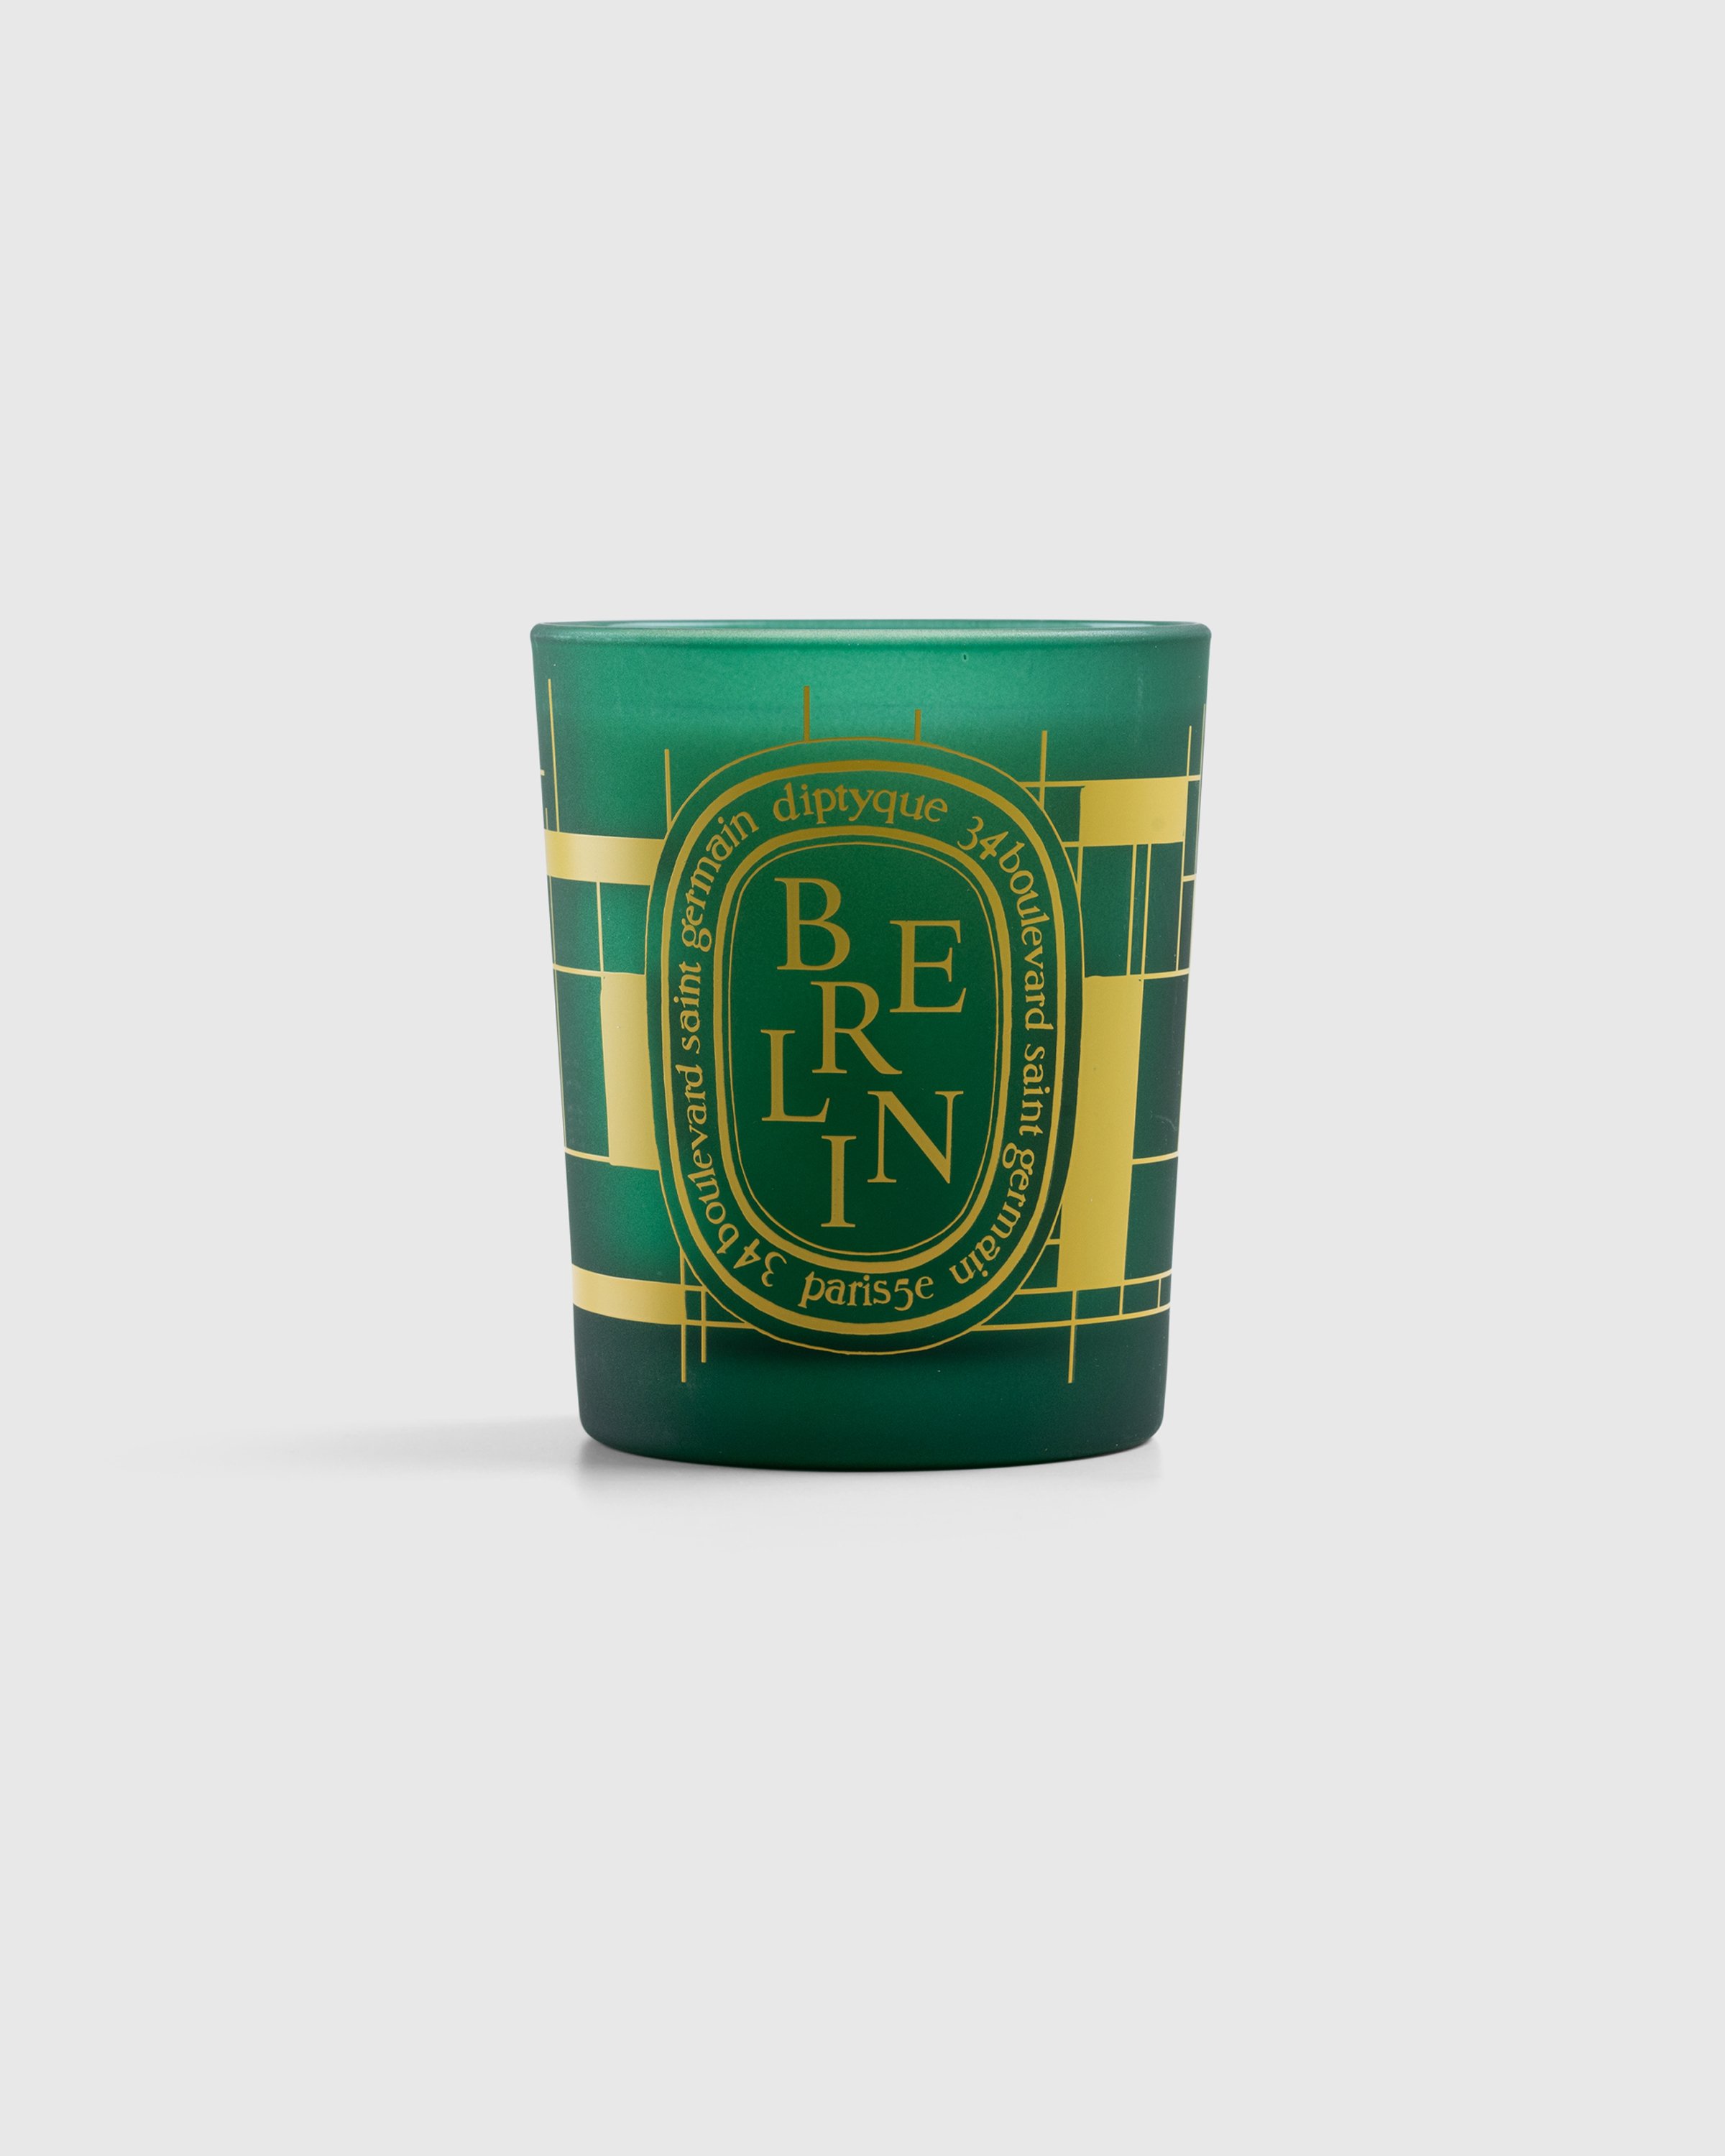 Diptyque - Berlin City Candle - Lifestyle - Green - Image 1